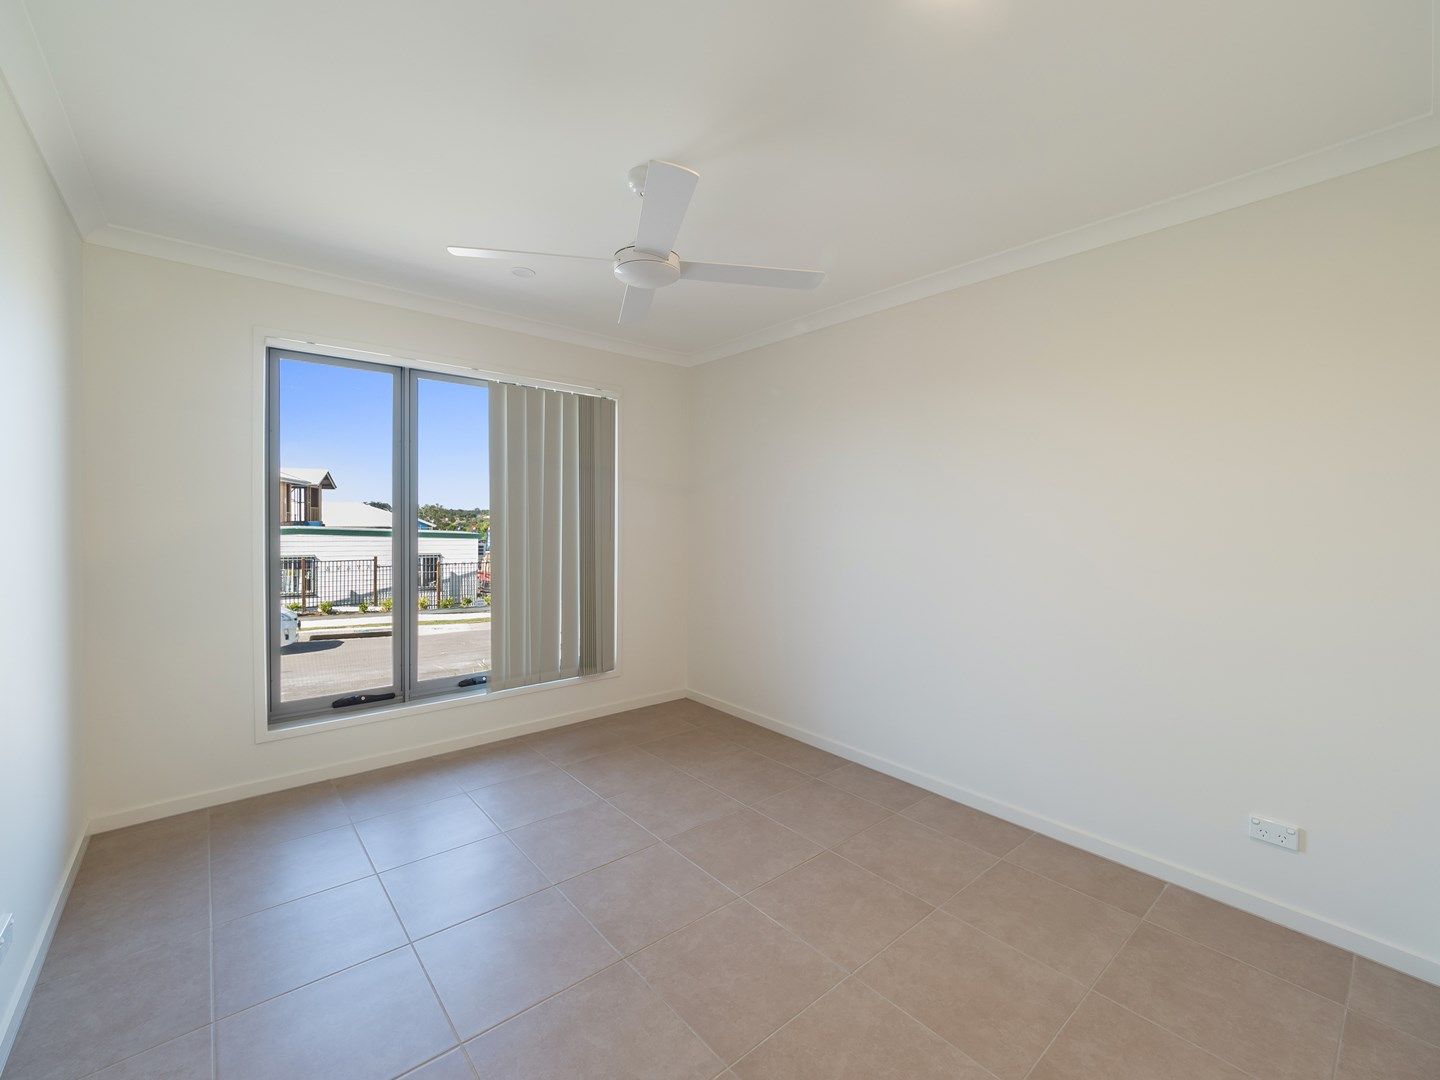 10/9 Springfield College Drive, Springfield QLD 4300, Image 2